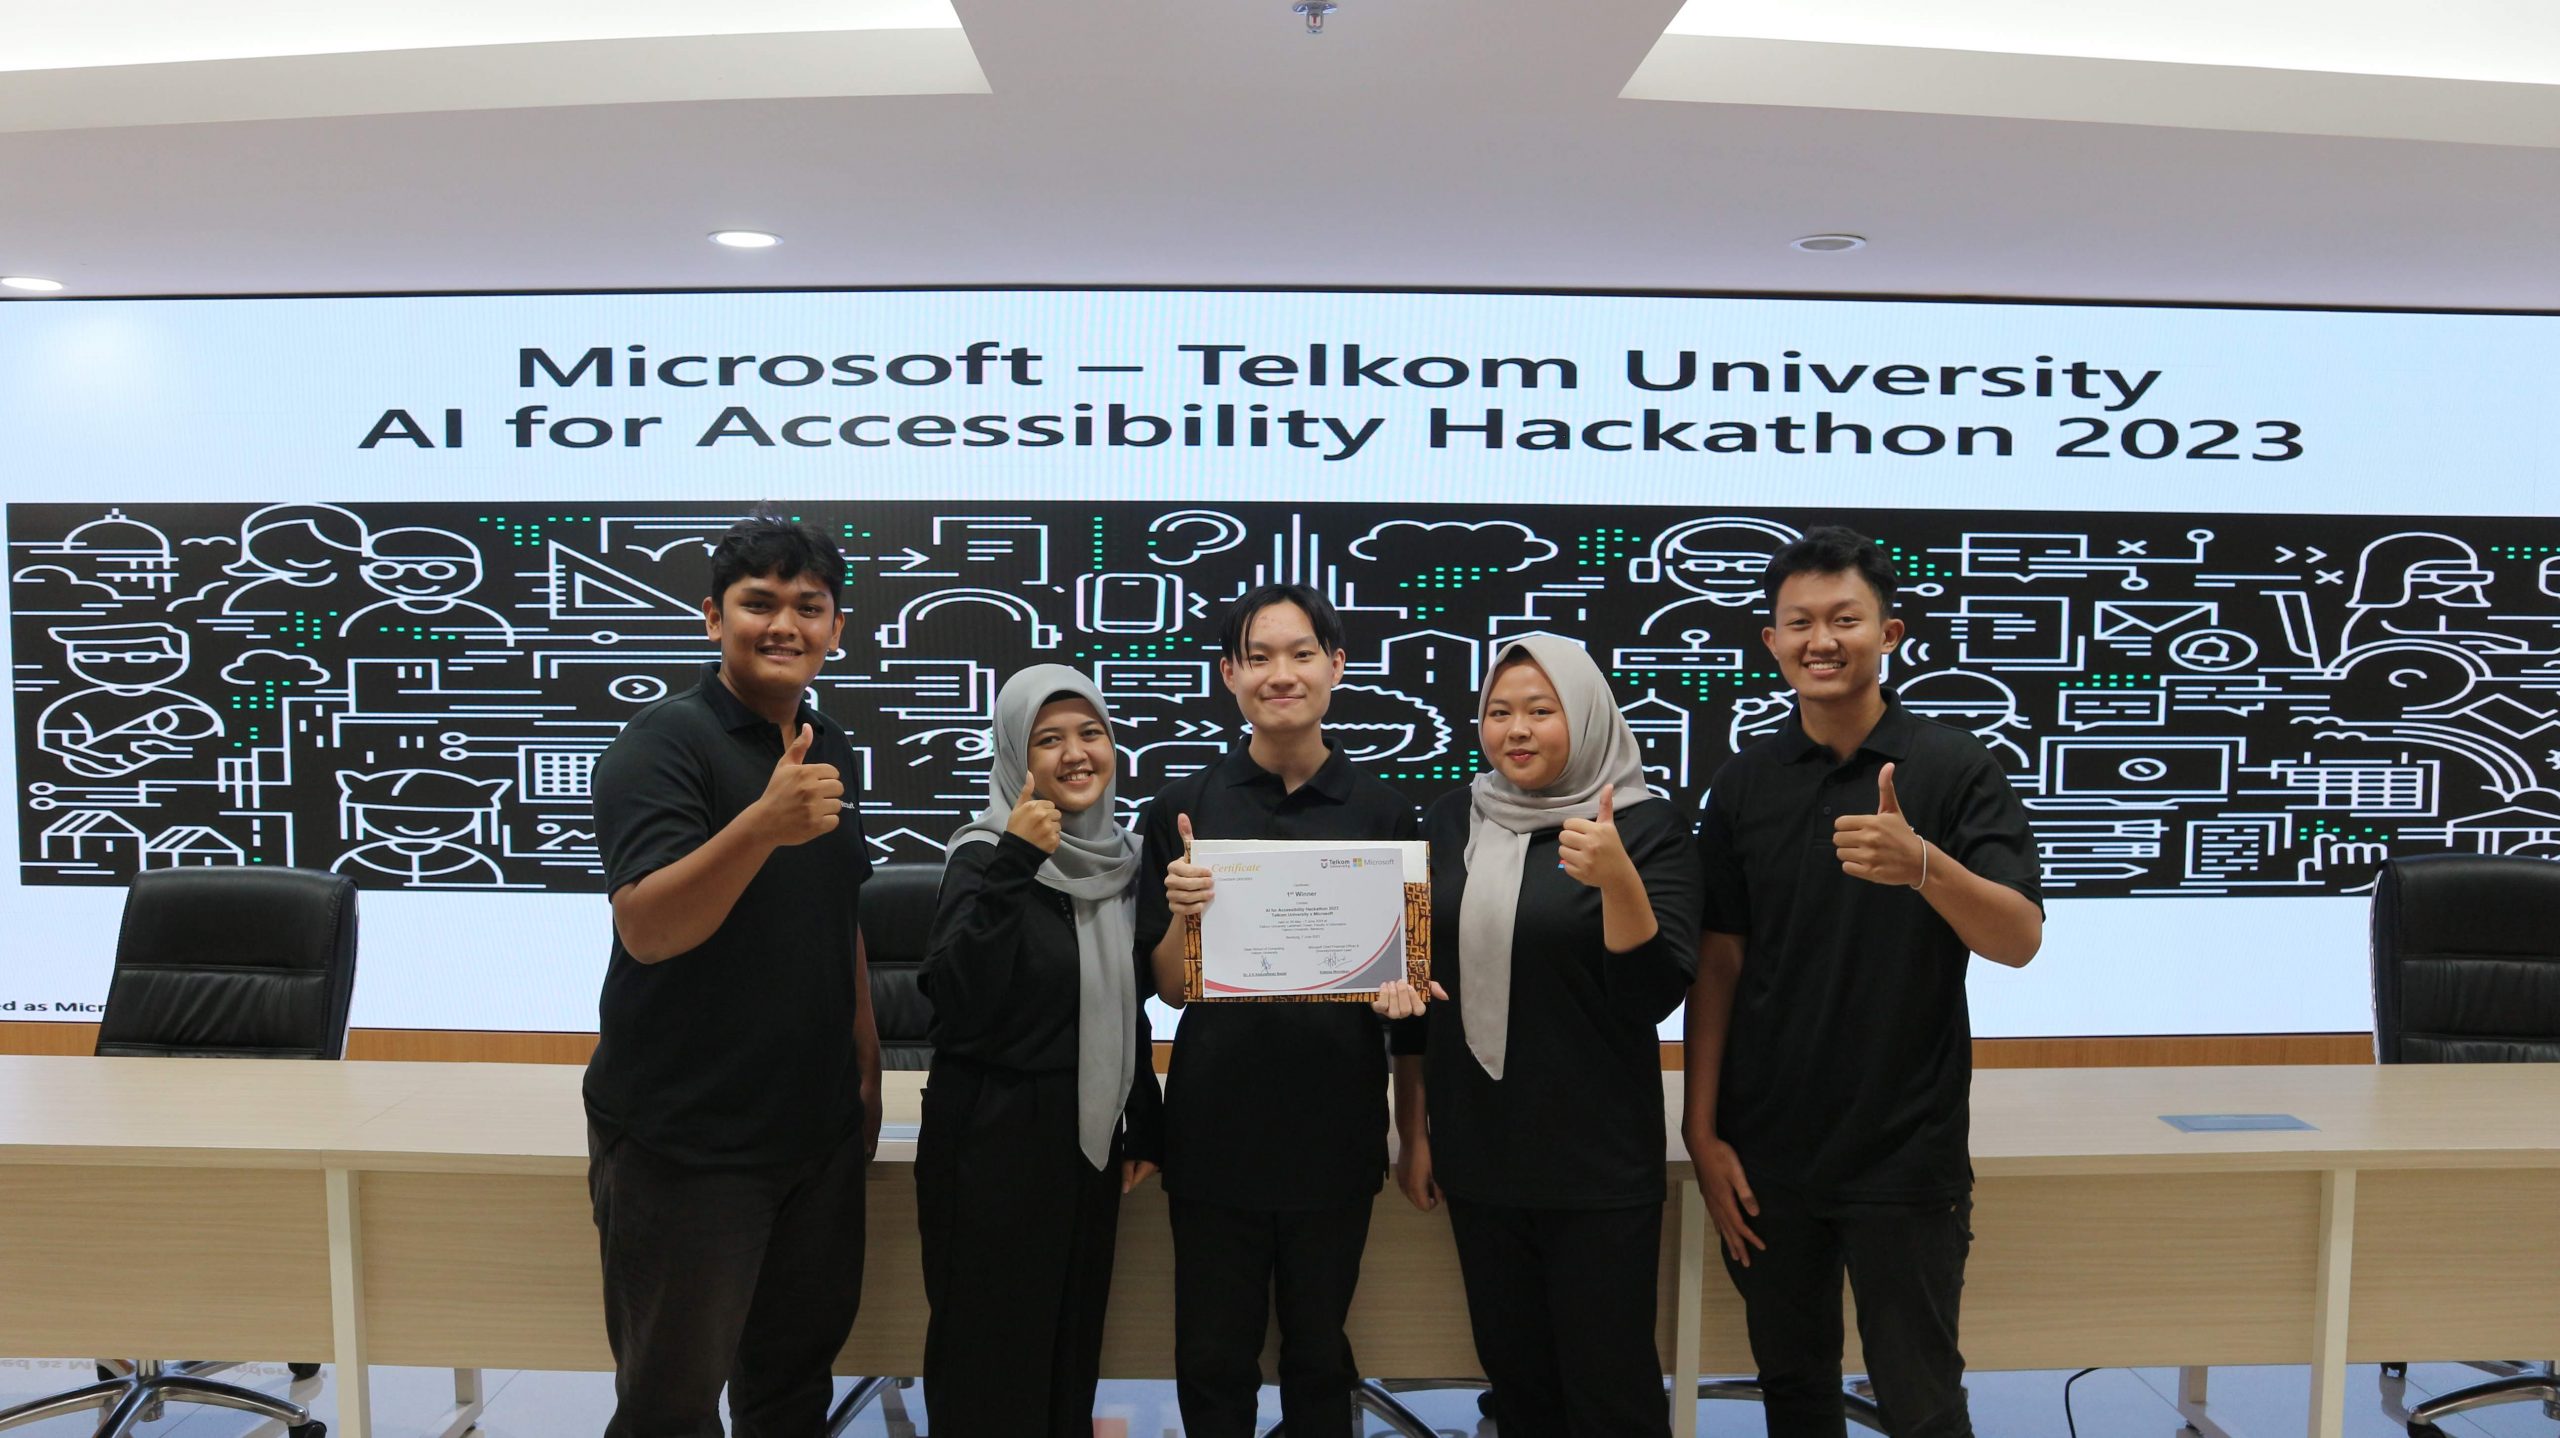 Five students holding a competition certificate after joining Microsoft - Telkom University AI for Accessibility Hackathon 2023